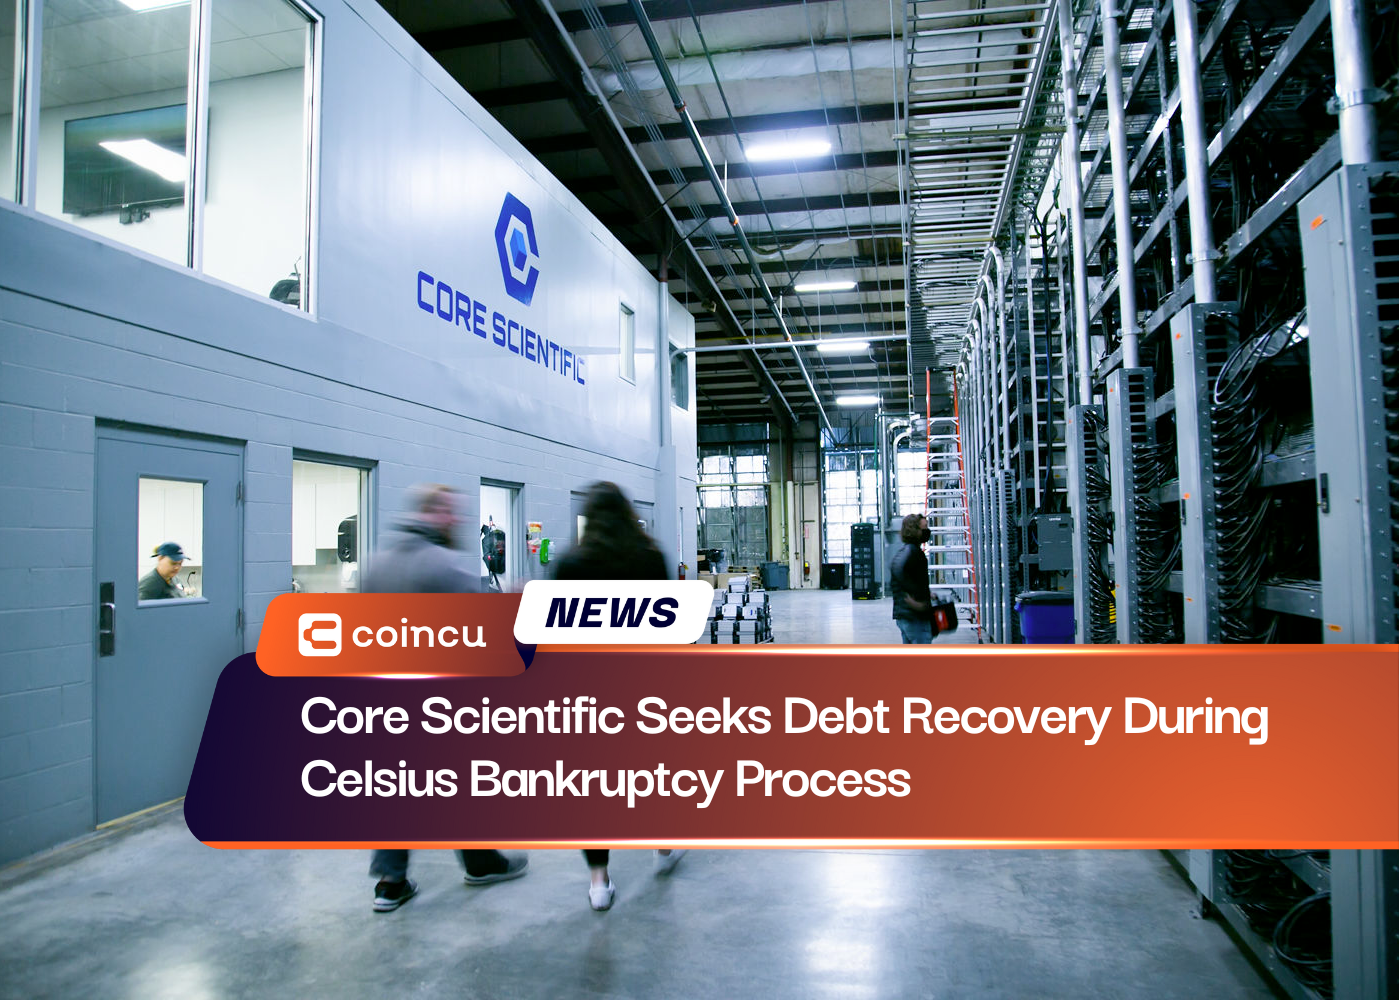 Core Scientific Seeks Debt Recovery During Celsius Bankruptcy Process